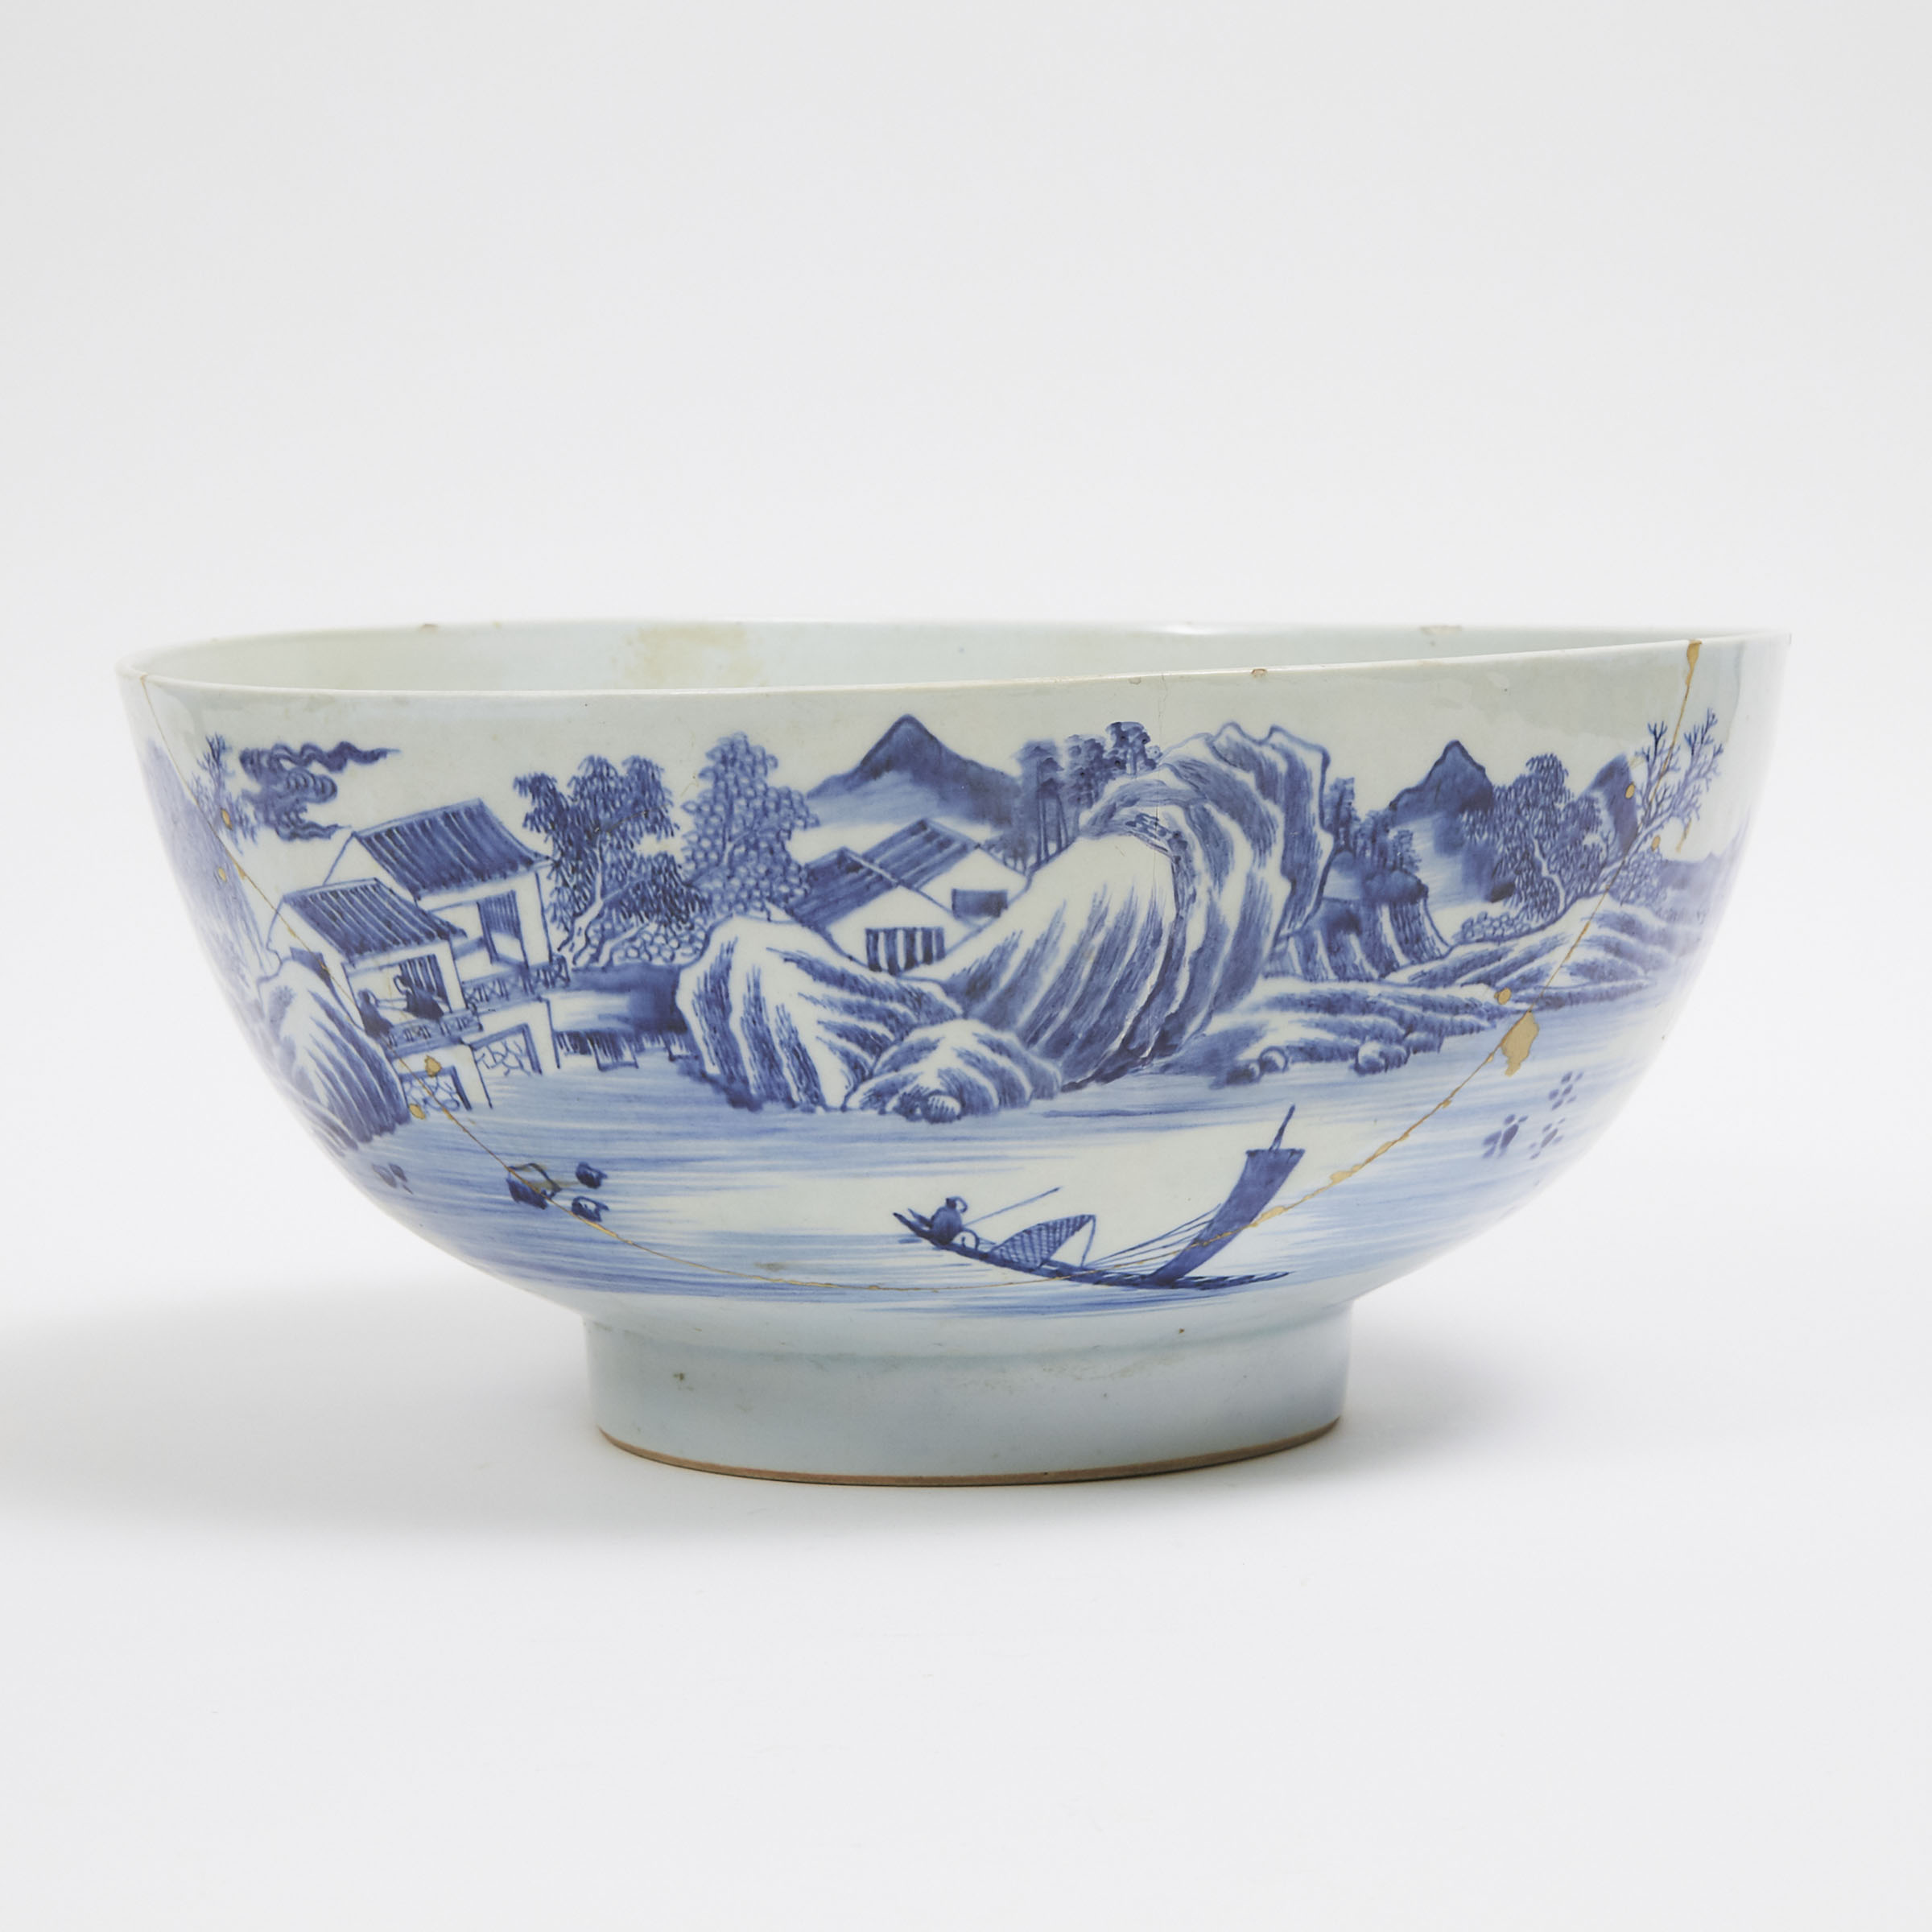 A Chinese Export Blue and White Punch Bowl, 19th Century